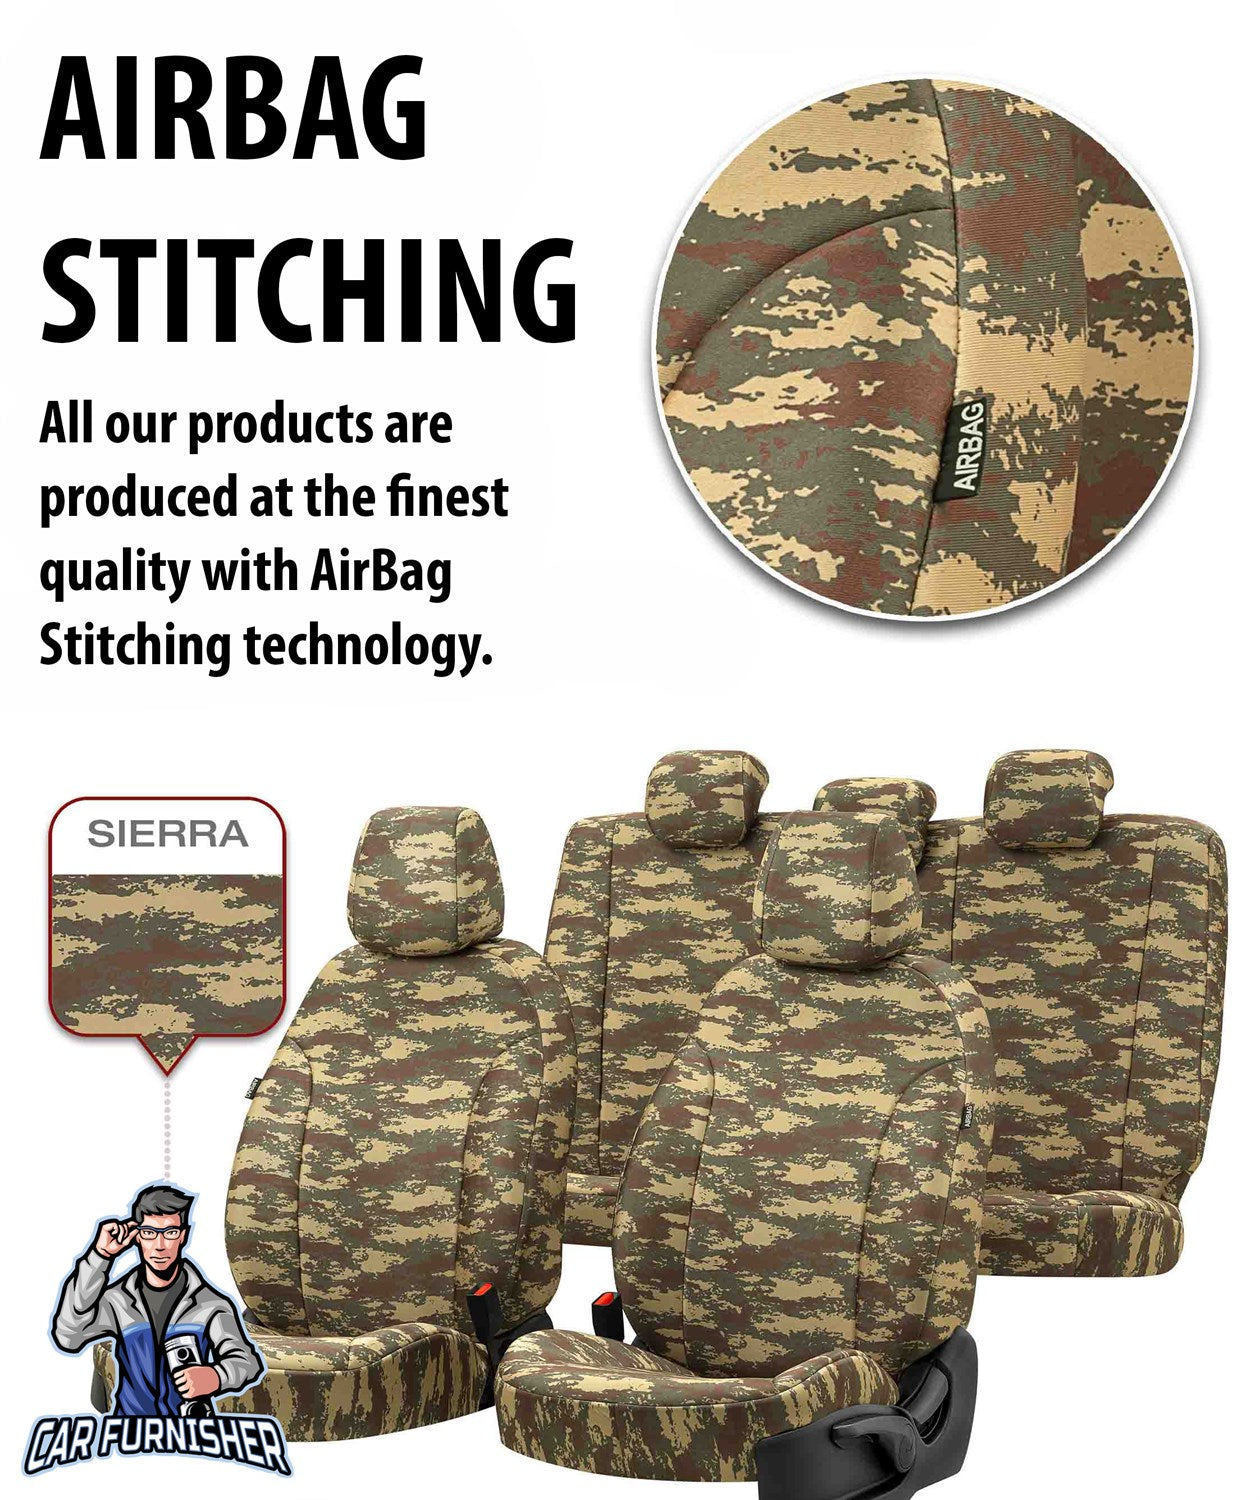 Ford Tourneo Courier Seat Covers Camouflage Waterproof Design Sahara Camo Waterproof Fabric